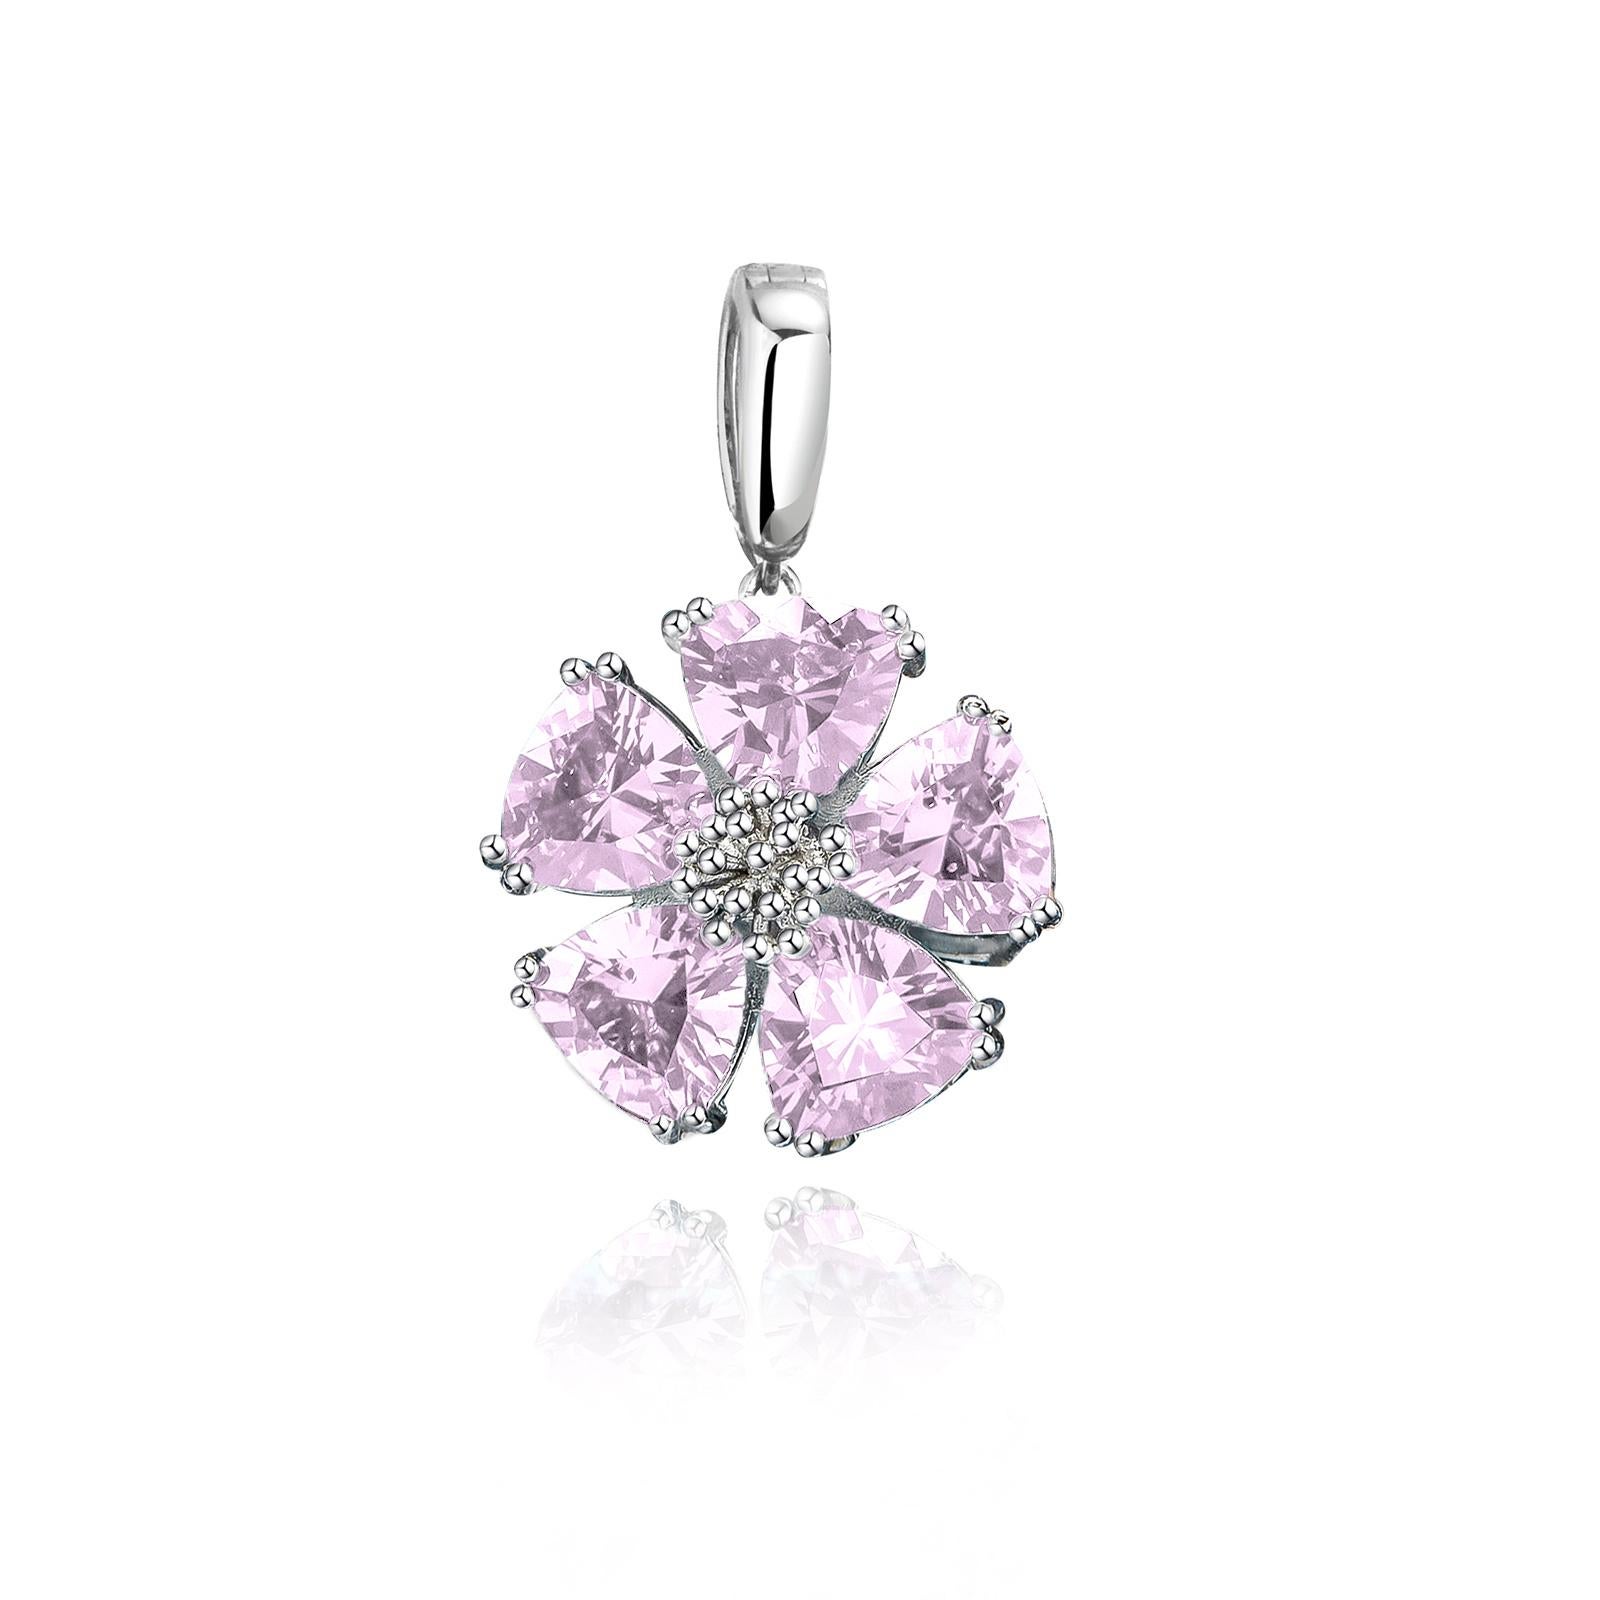 Designed in NYC

.925 Sterling Silver 5 x 7 mm Amethyst Blossom Stone Pendant. No matter the season, allow natural beauty to surround you wherever you go. Blossom stone pendant: 

Sterling silver 
High-polish finish
Light-weight 
20 mm blossom with